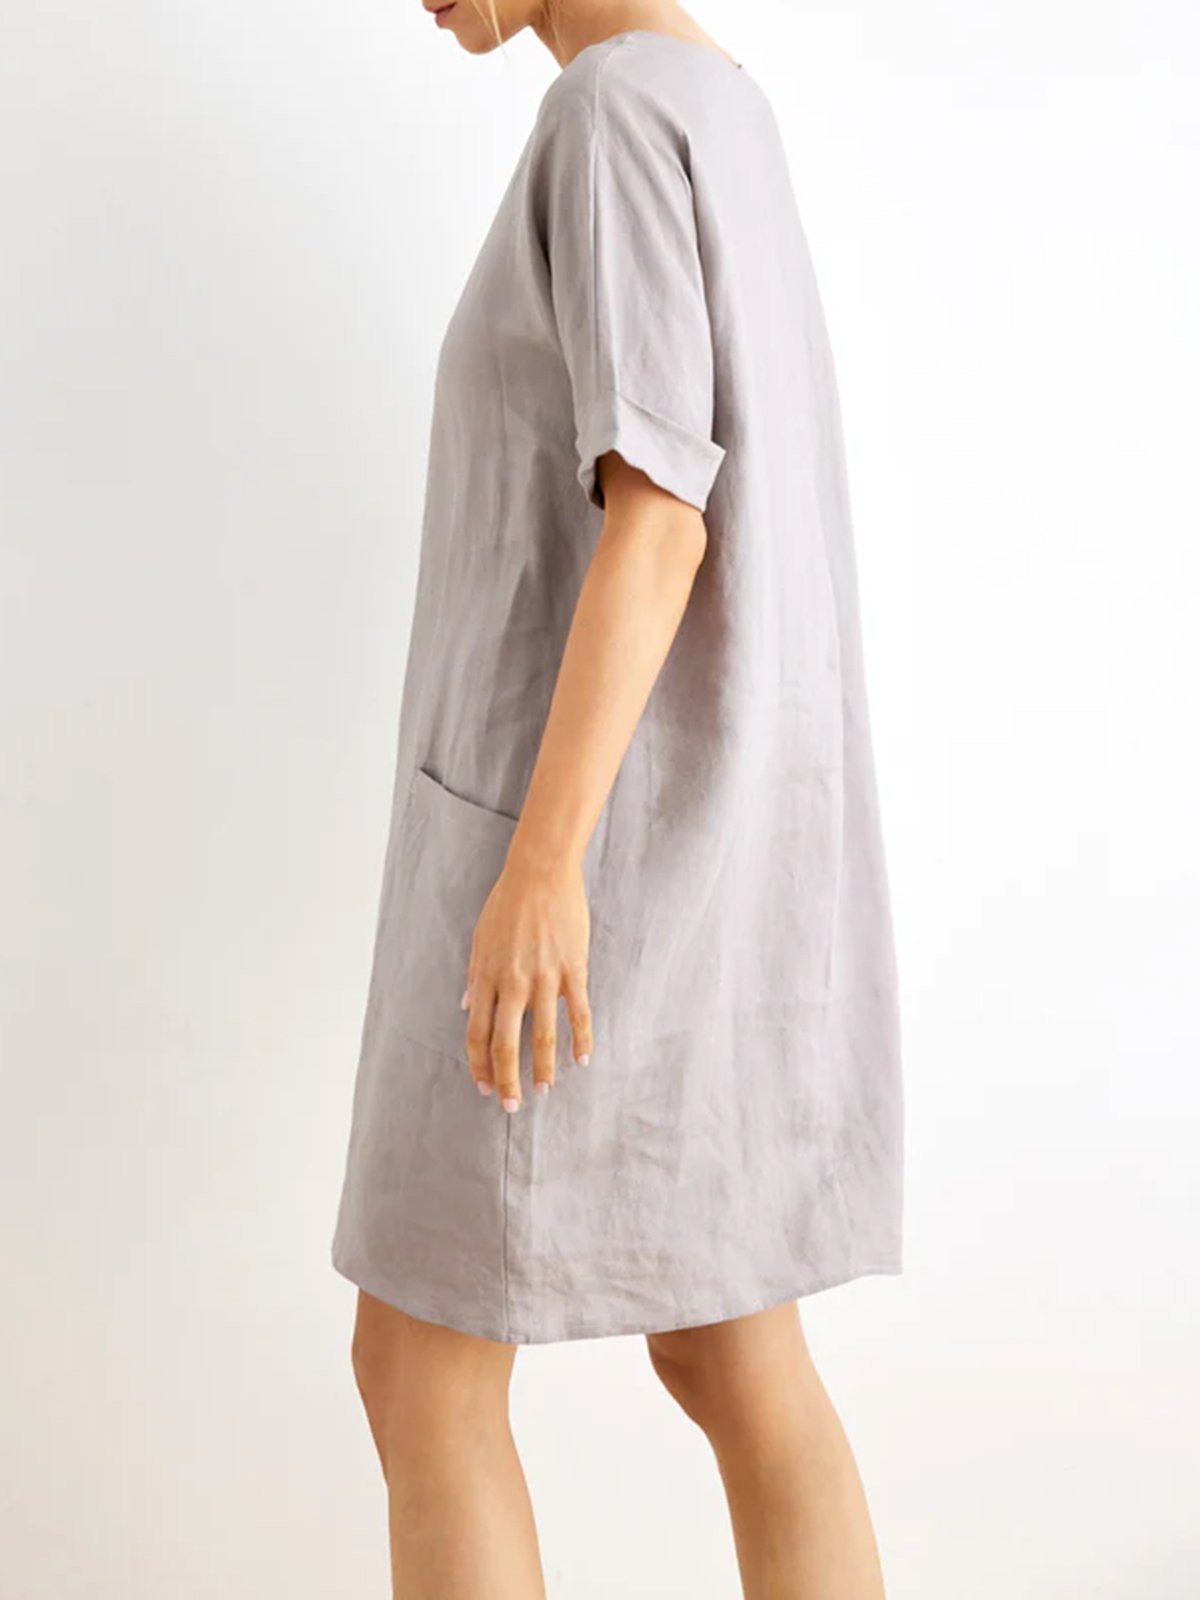 Casual Crew Neck Regular Fit Linen Dress With No